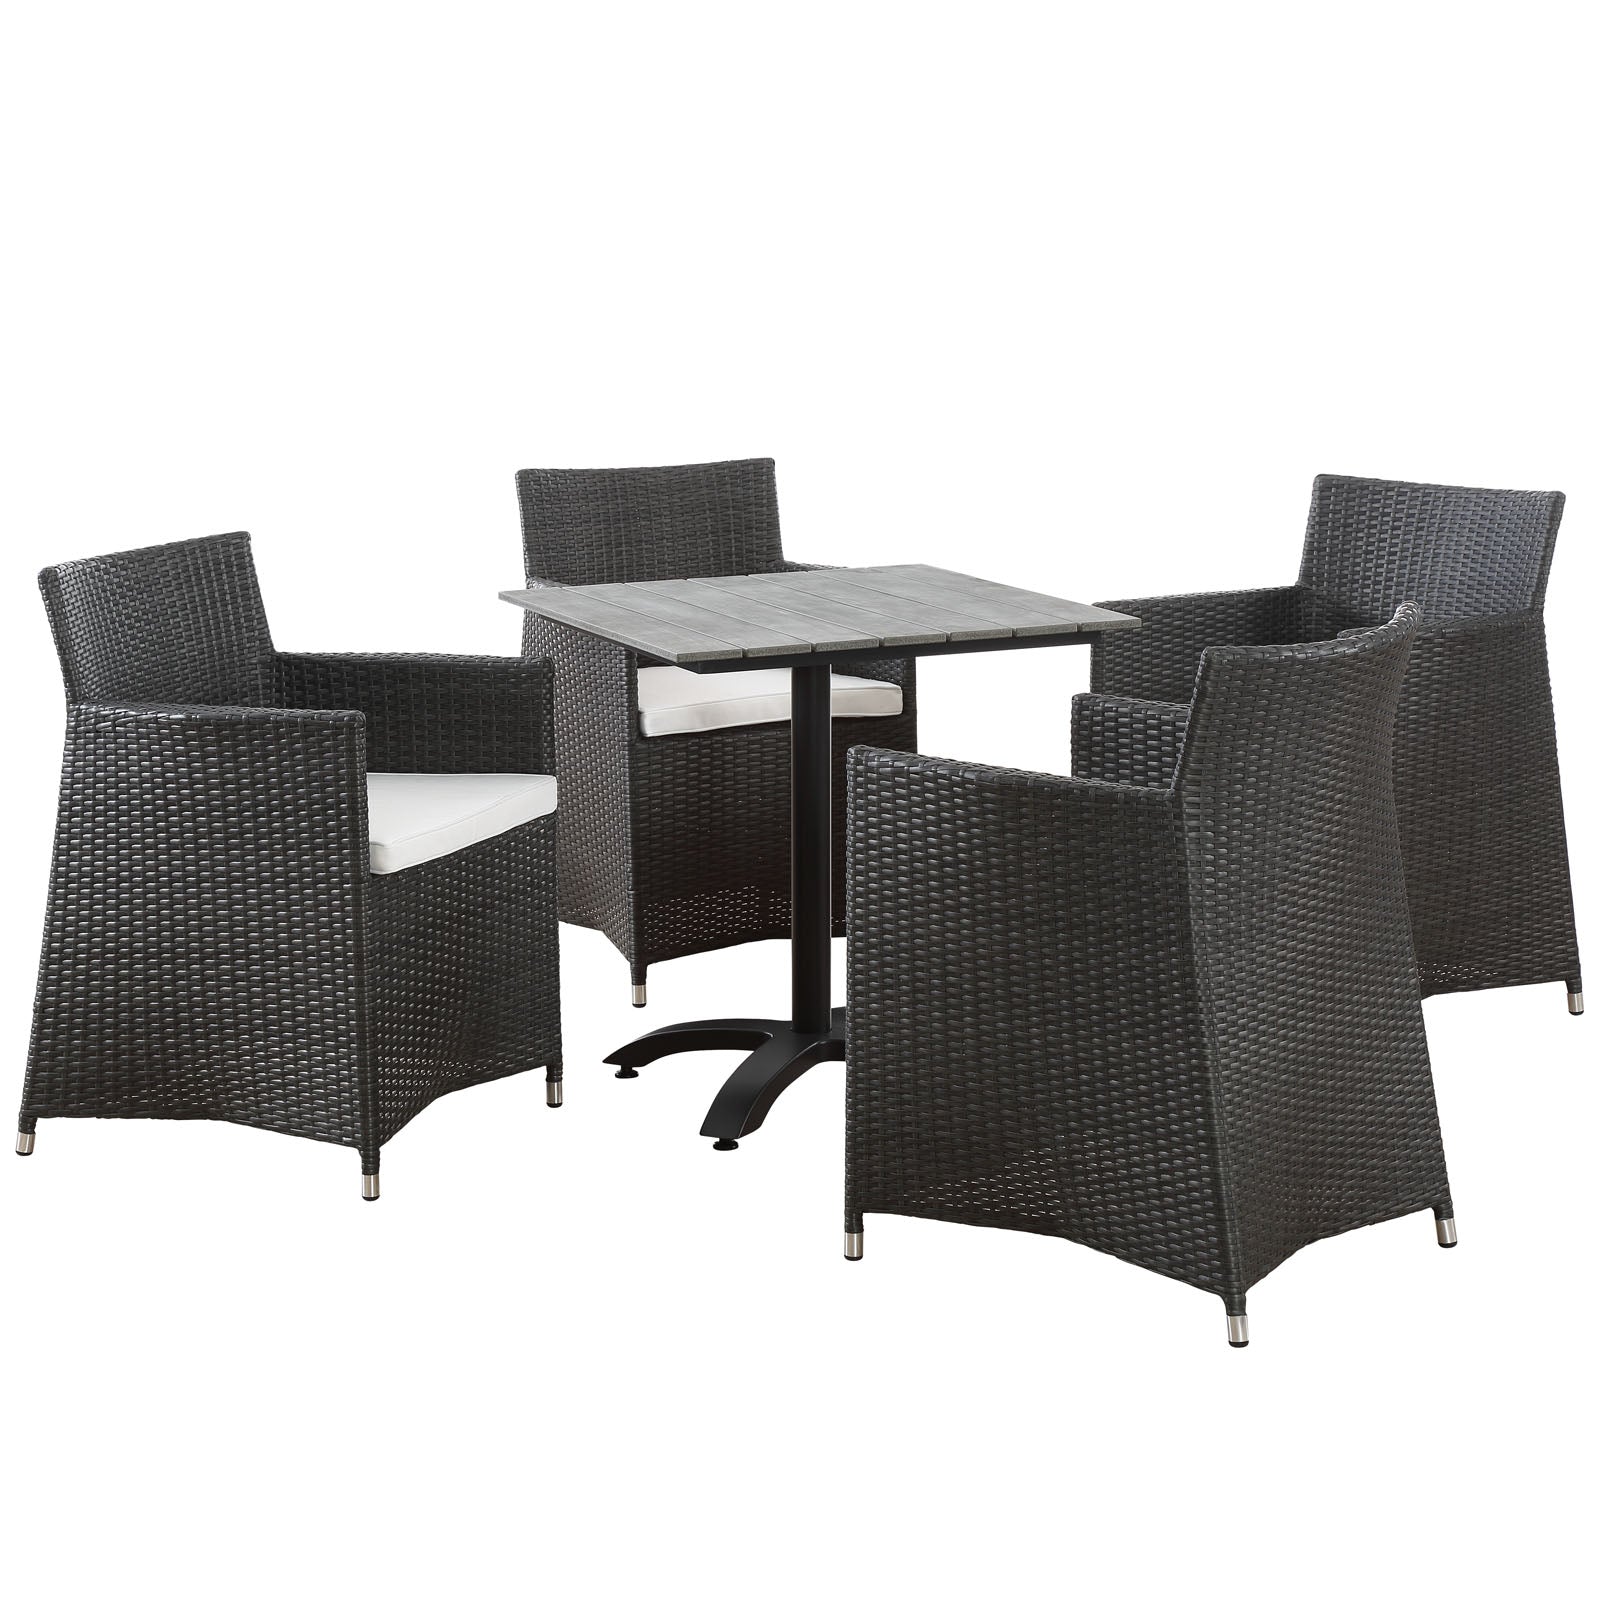 Modway Outdoor Dining Sets - Junction Outdoor Patio Dining Set For 4 Brown And White